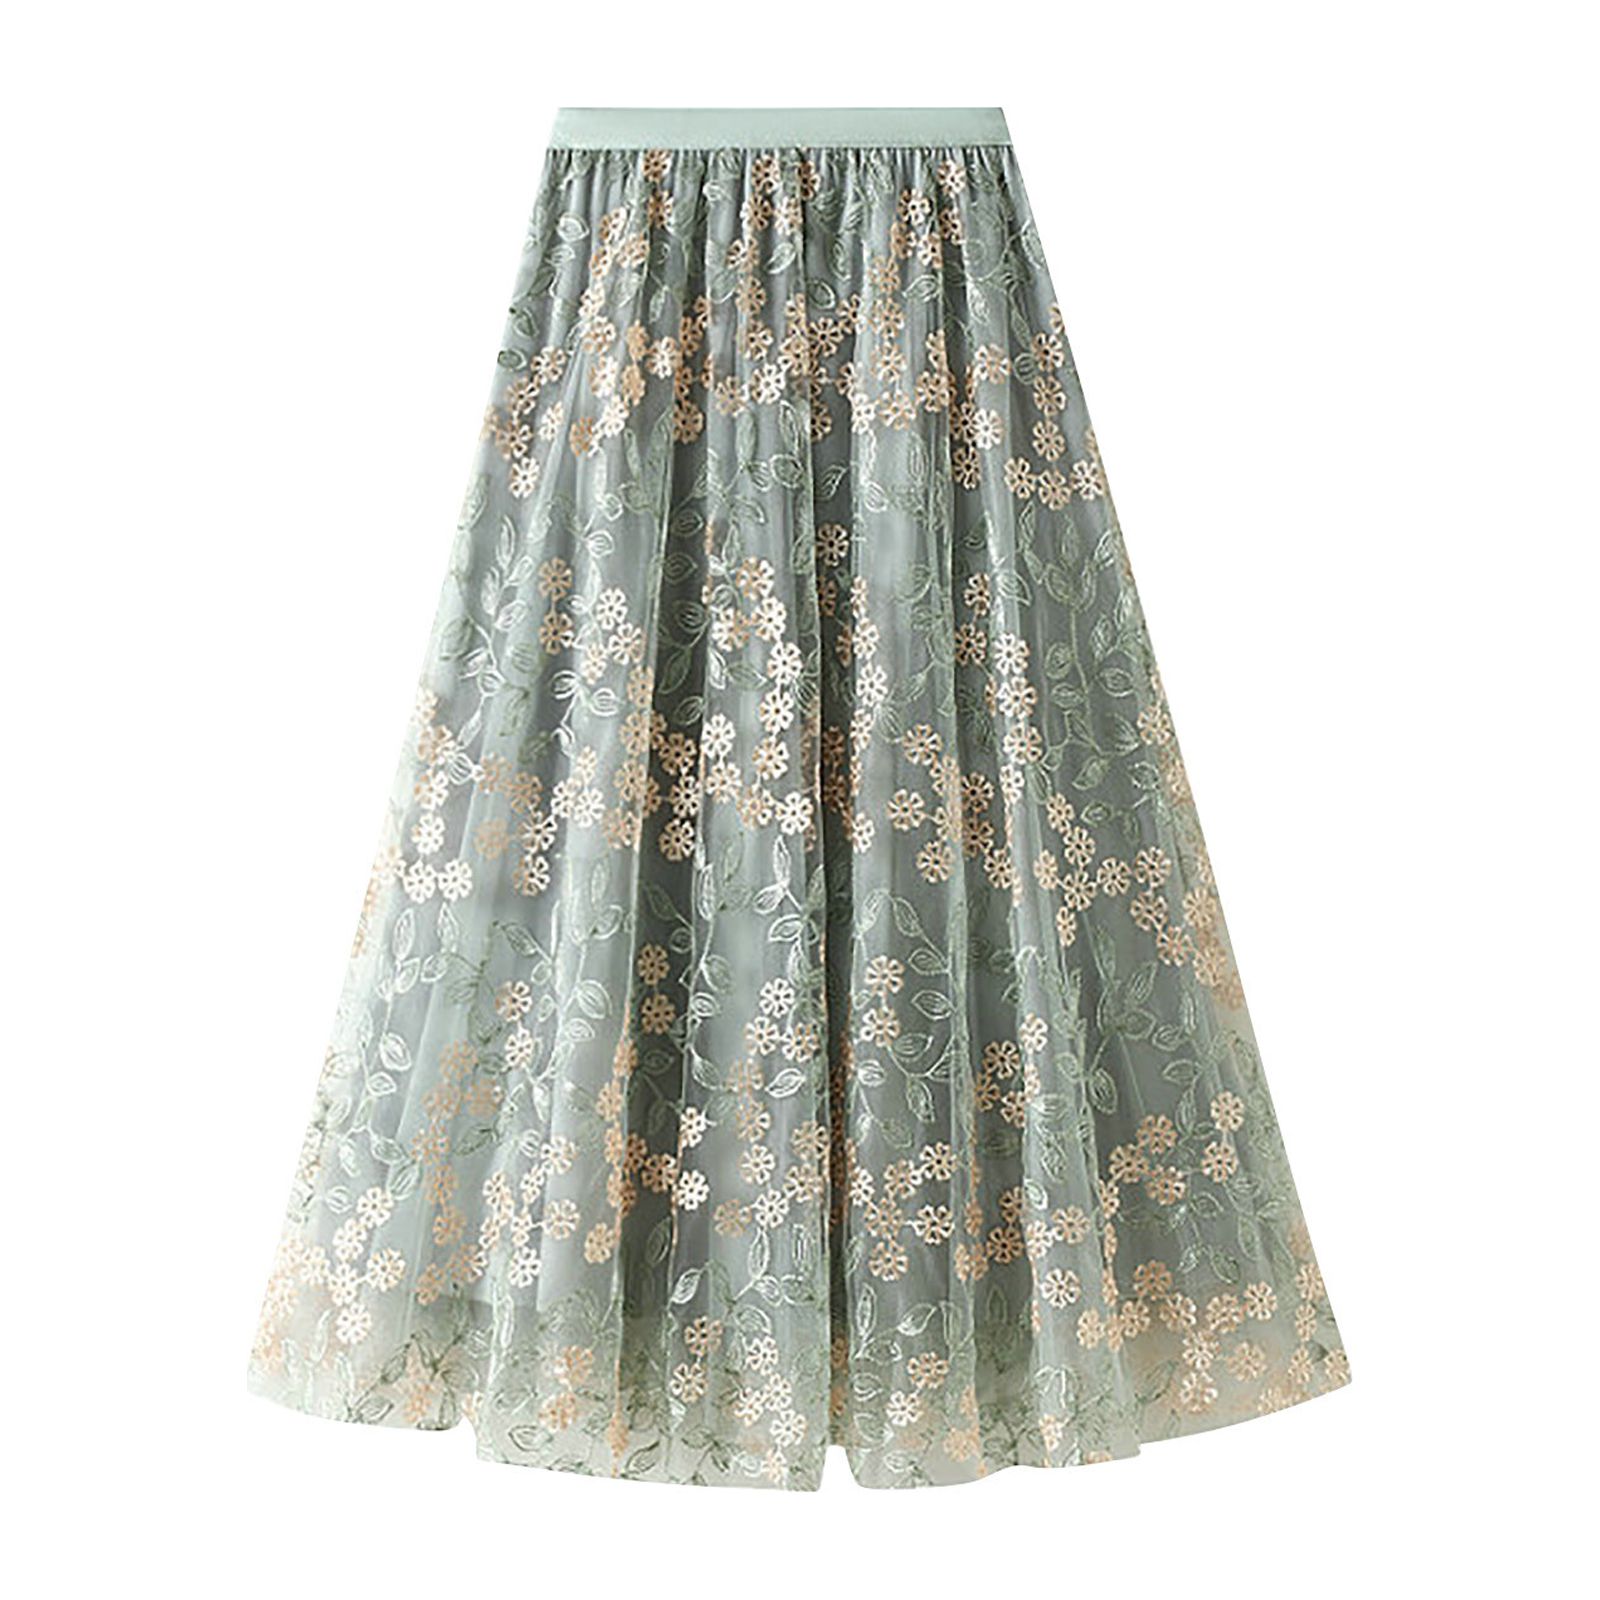 Women's High Waist A-Line Midi Mesh Skirt with Lace Vintage Floral ...